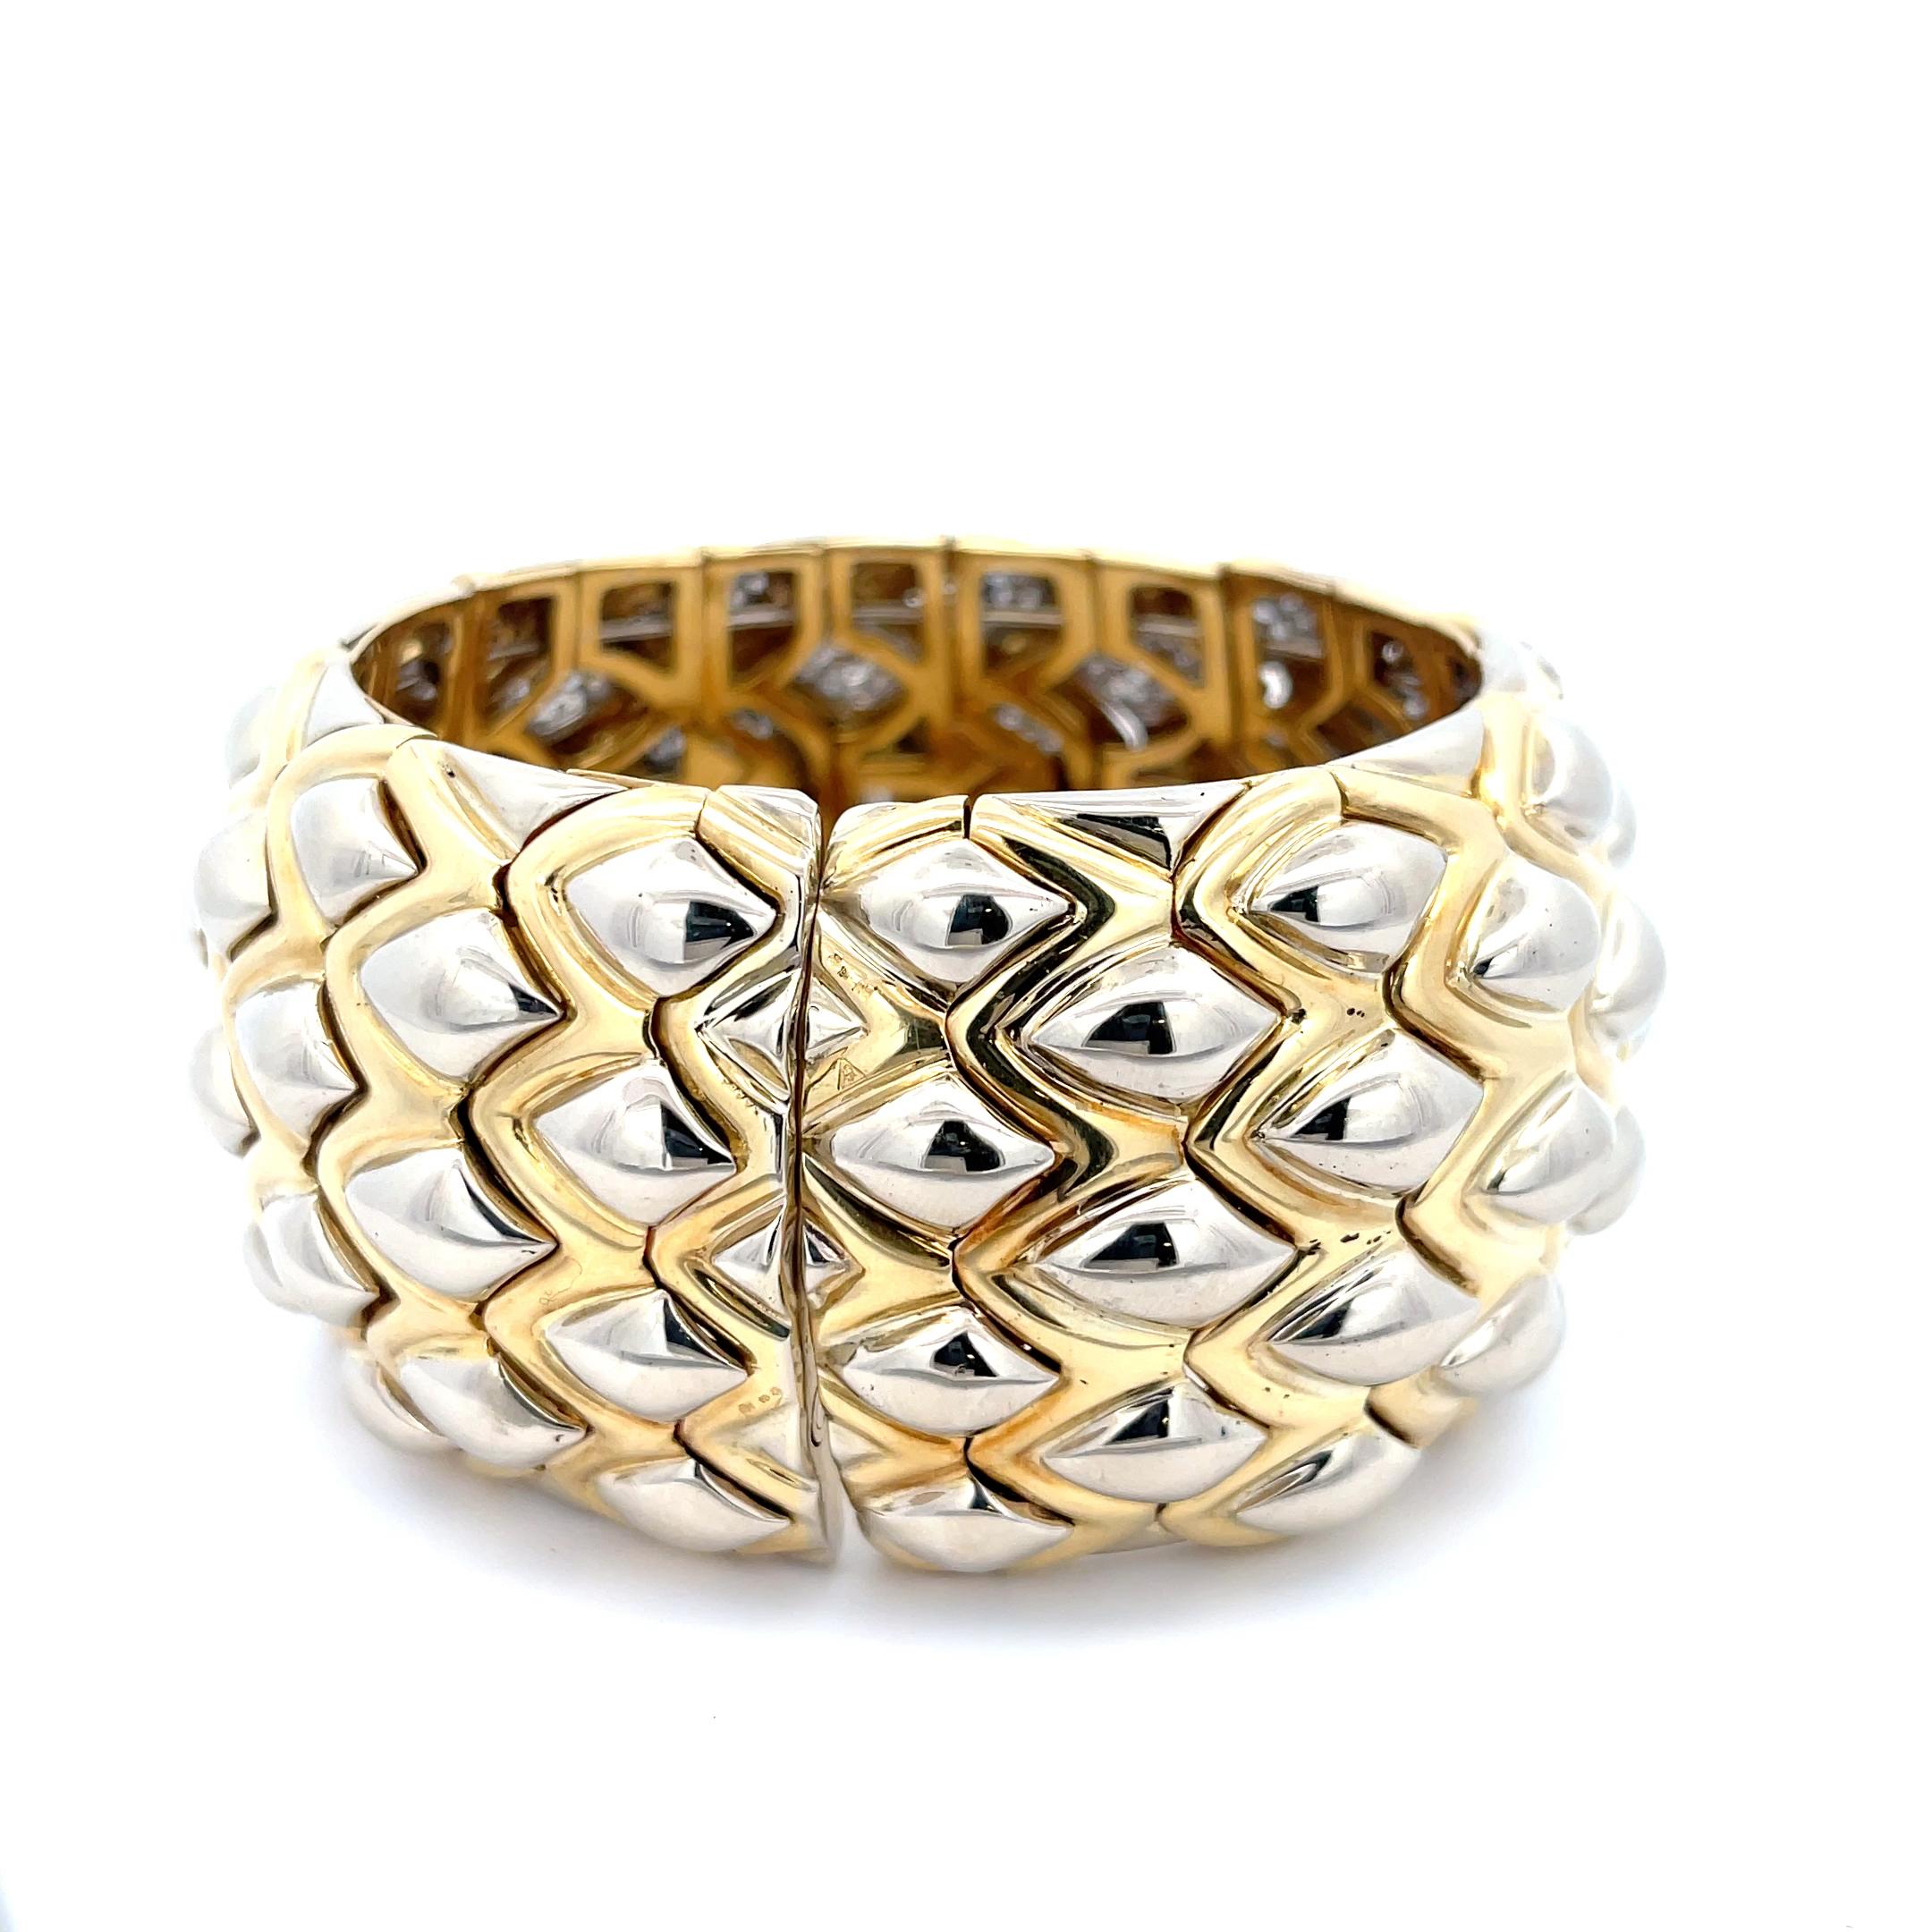 Diamond Scale Cuff in 18K White and Yellow Gold. The cuff features approximately 19ctw of pave set round diamonds. The cuff is 1.5